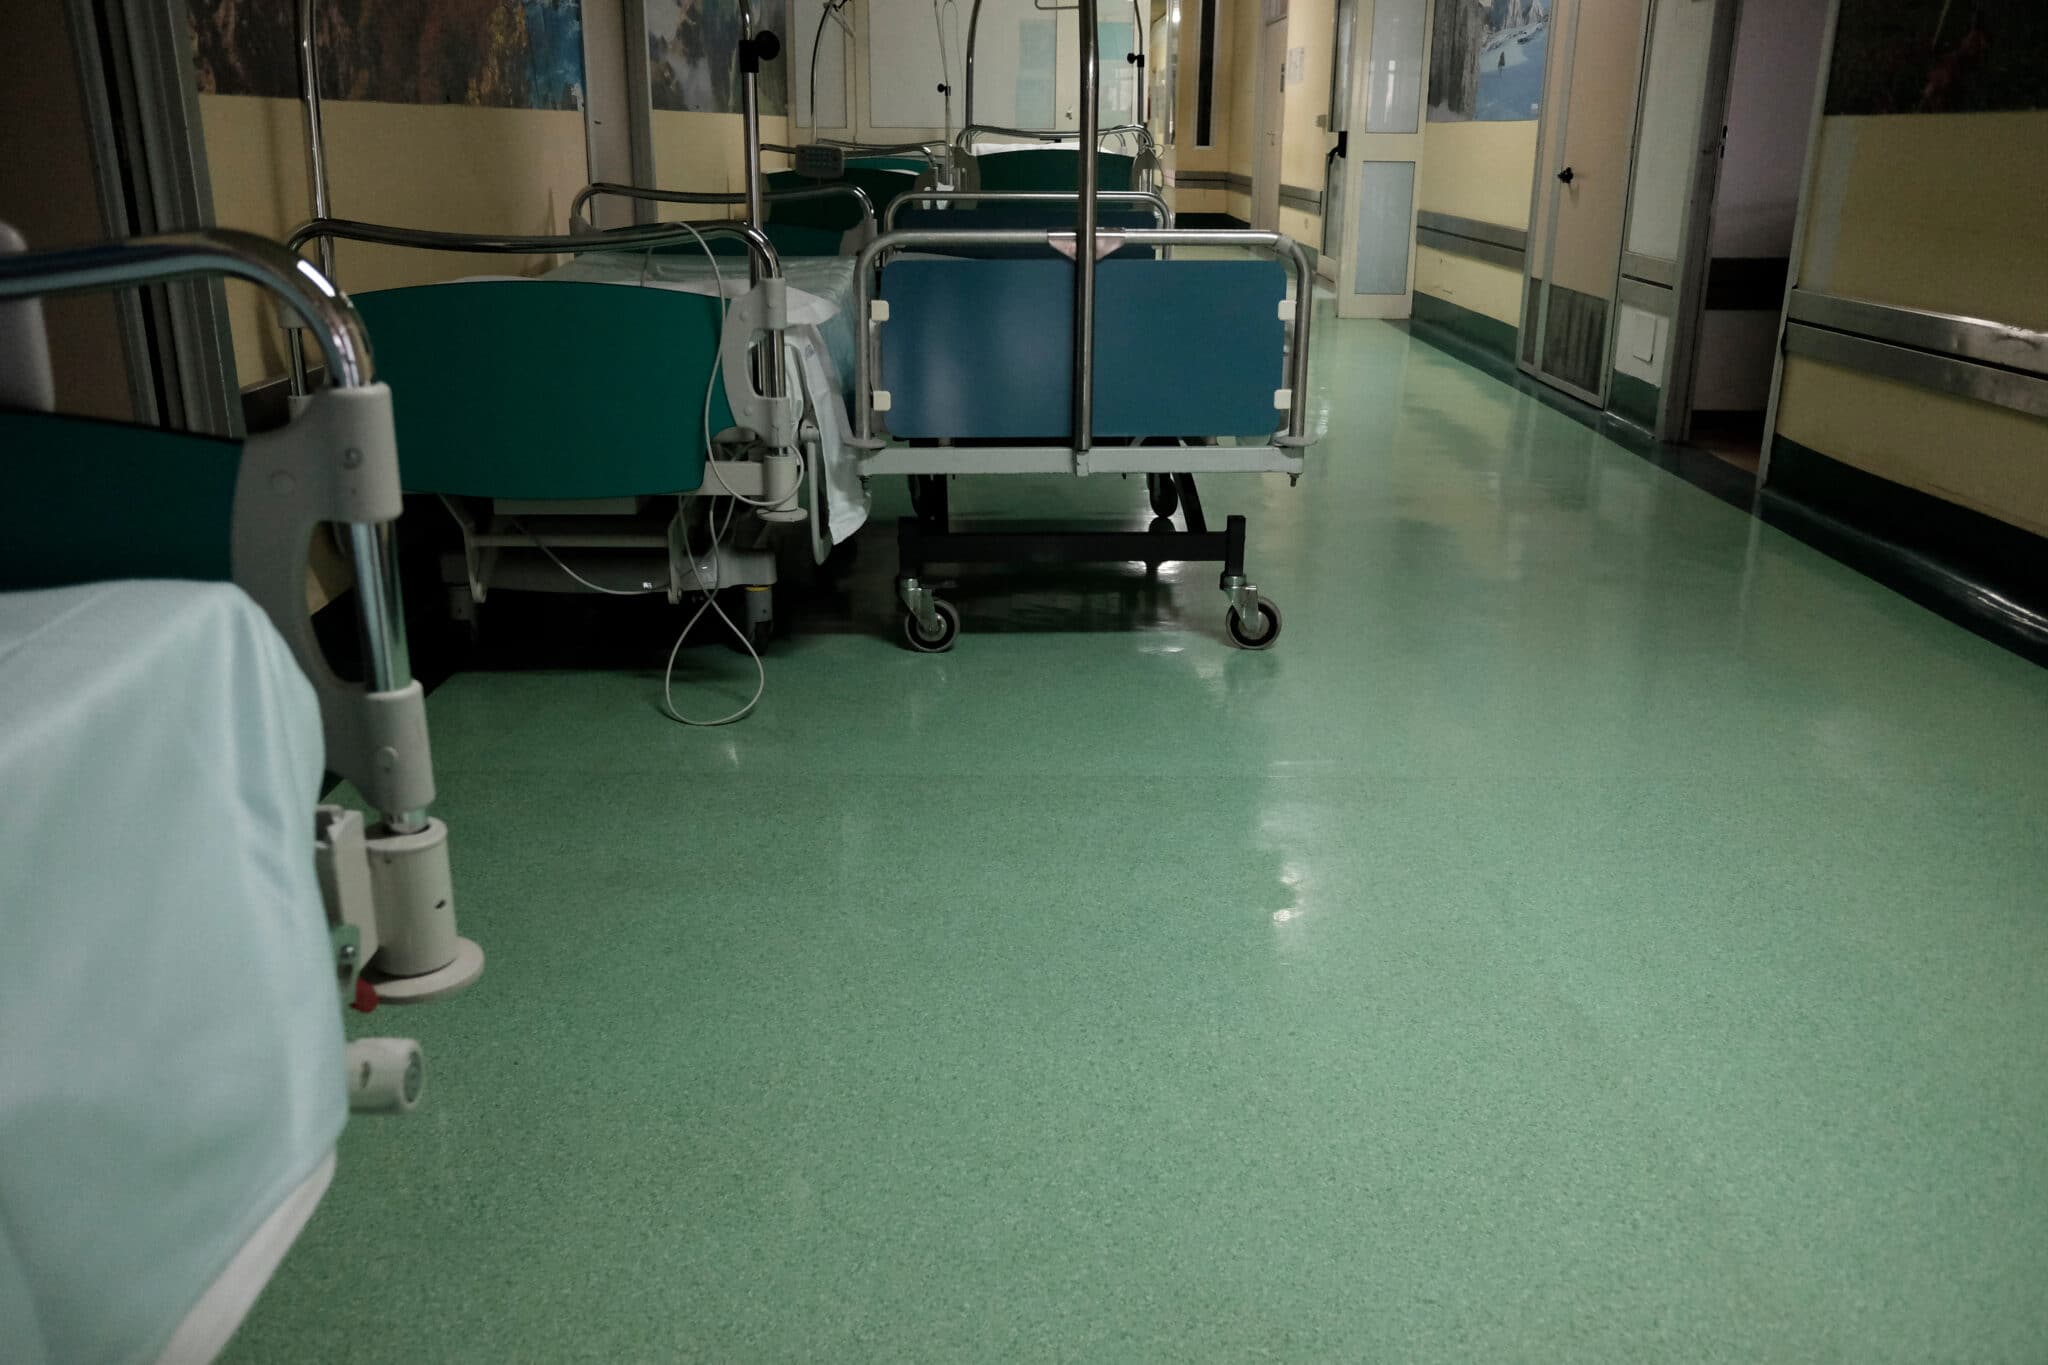 trolleys in a corridor of an overcrowded hospital